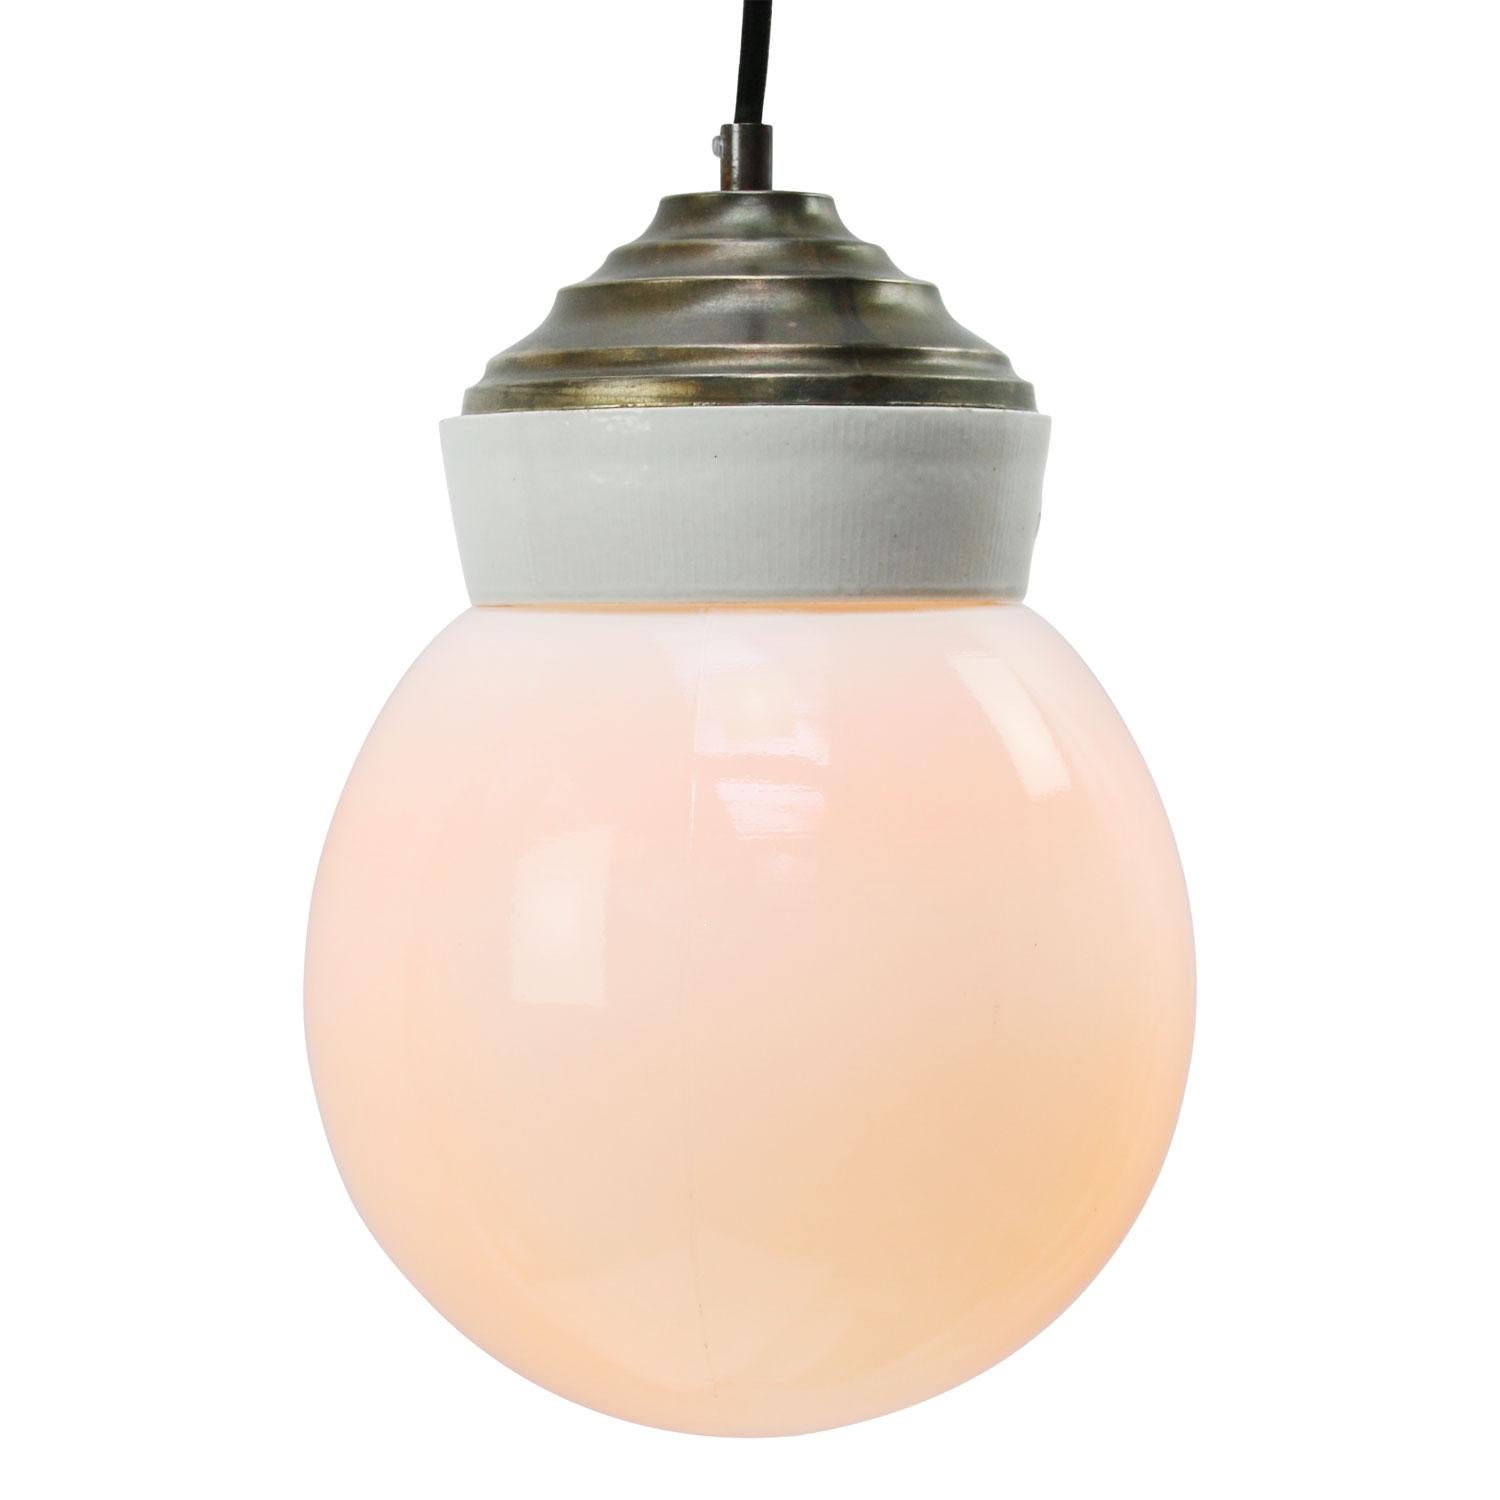 Porcelain industrial hanging lamp.
White porcelain, brass and opaline glass.
2 conductors, no ground.

Weight: 2.40 kg / 5.3 lb

Priced per individual item. All lamps have been made suitable by international standards for incandescent light bulbs,